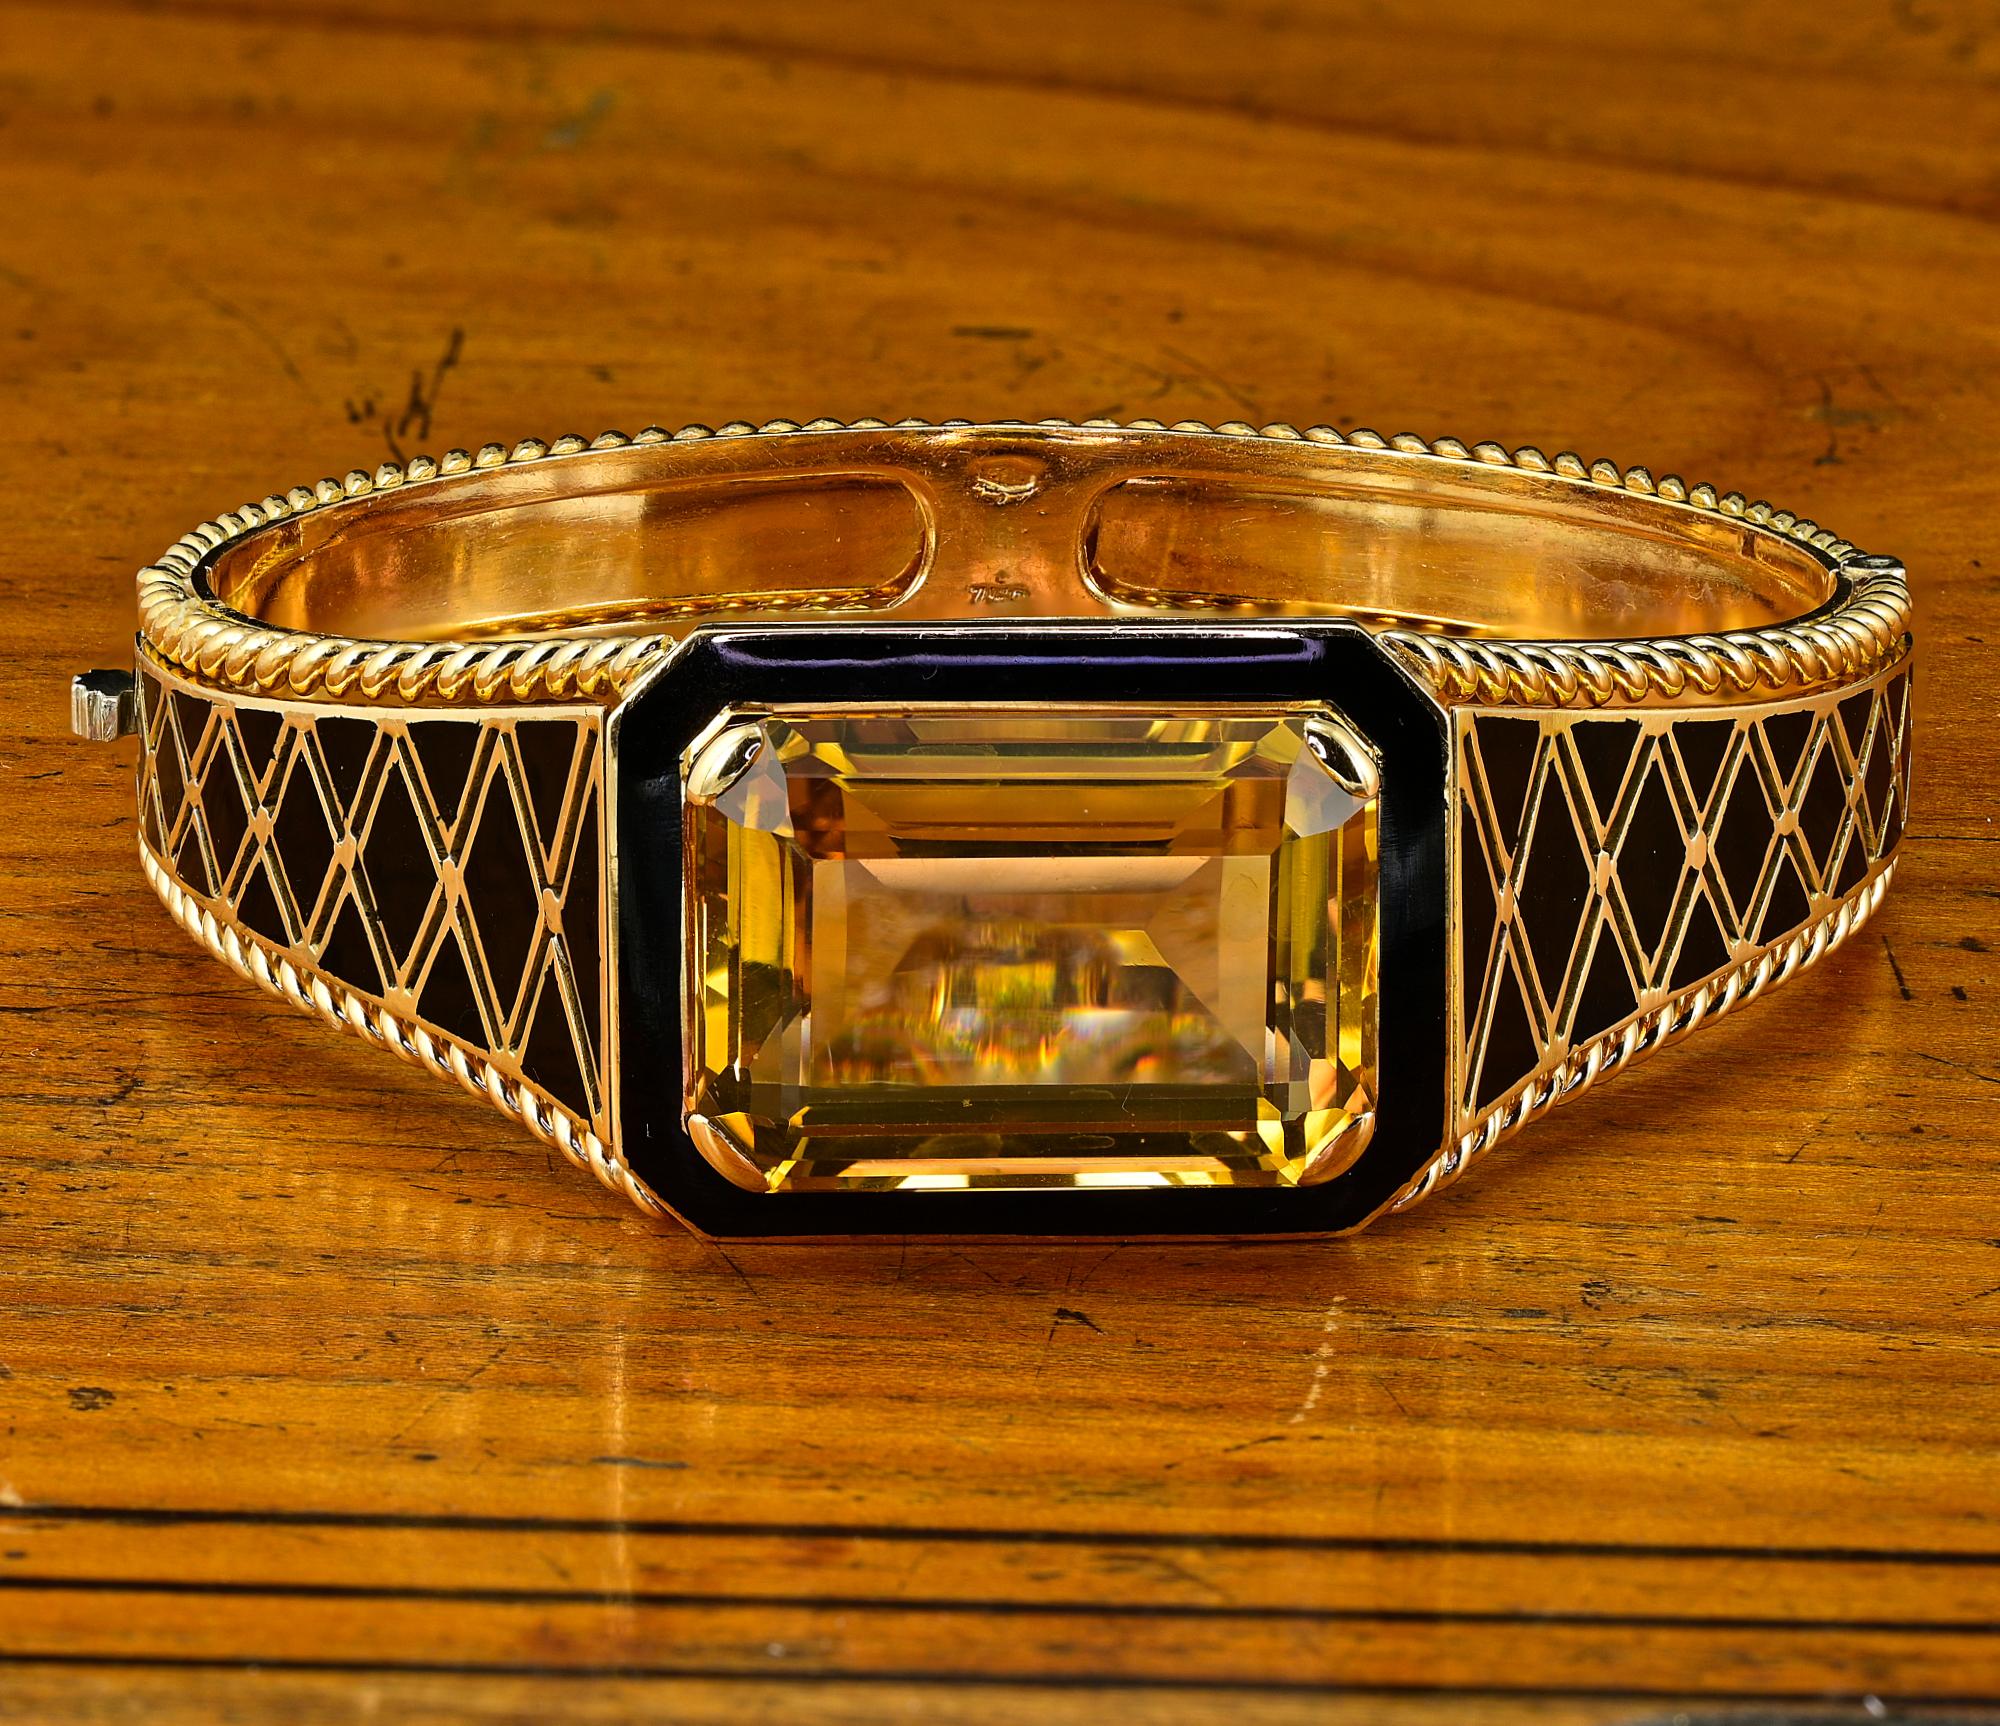 This stunning Retro period bangle is 1935 circa, bearing Italian Stamps for the period
Majestic hand workmanship made of solid 18 KT, weighs 61.4 grams
It faces up with the center natural Citrine which is a known weight of 33.80 Ct. (23.34 x 17.63